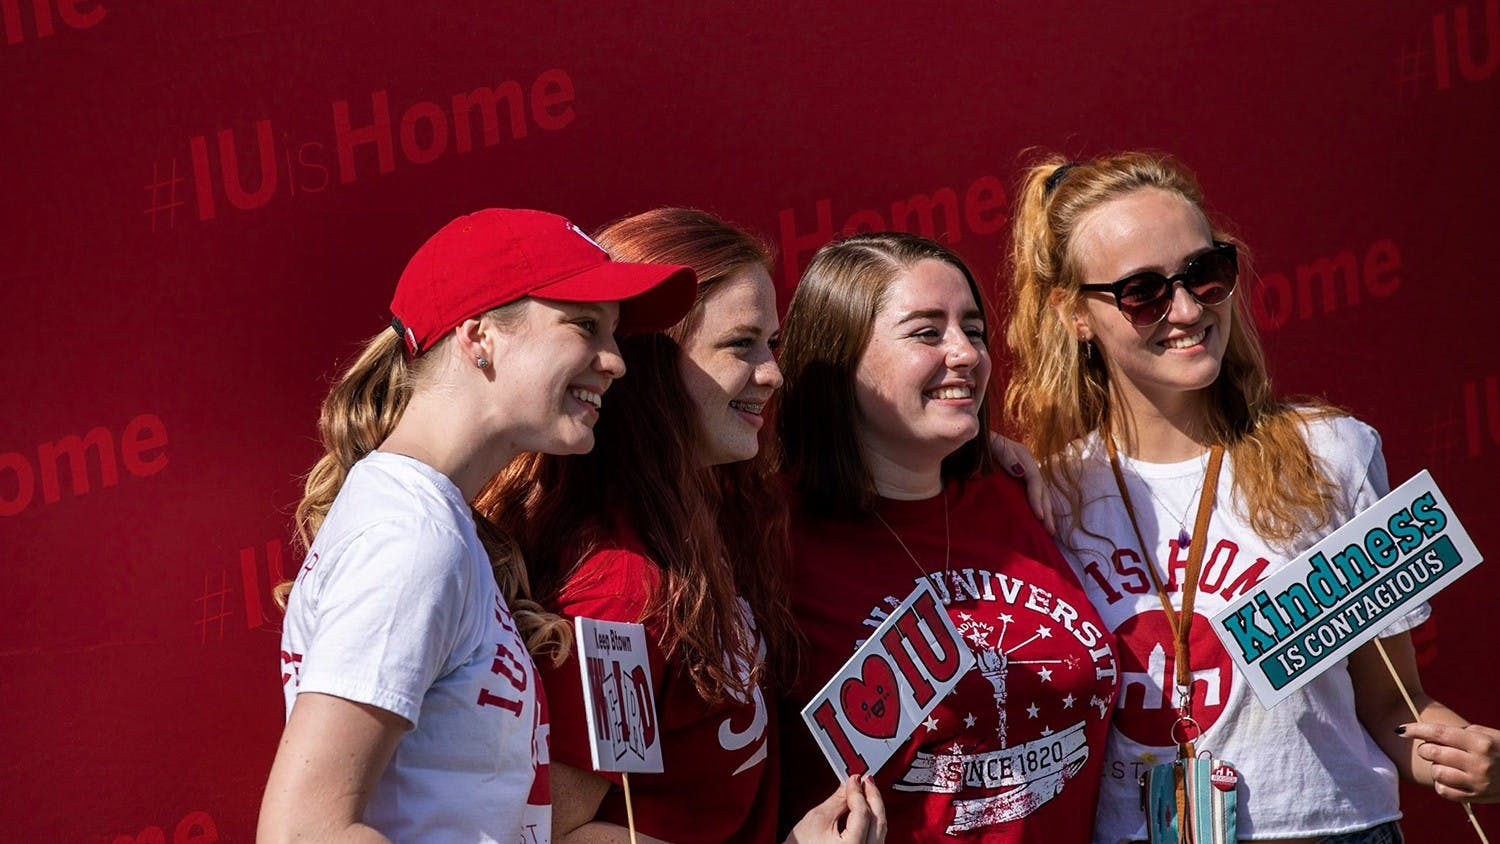 Students show off their spirit in IU gear at the 2019 IU Day Block Party